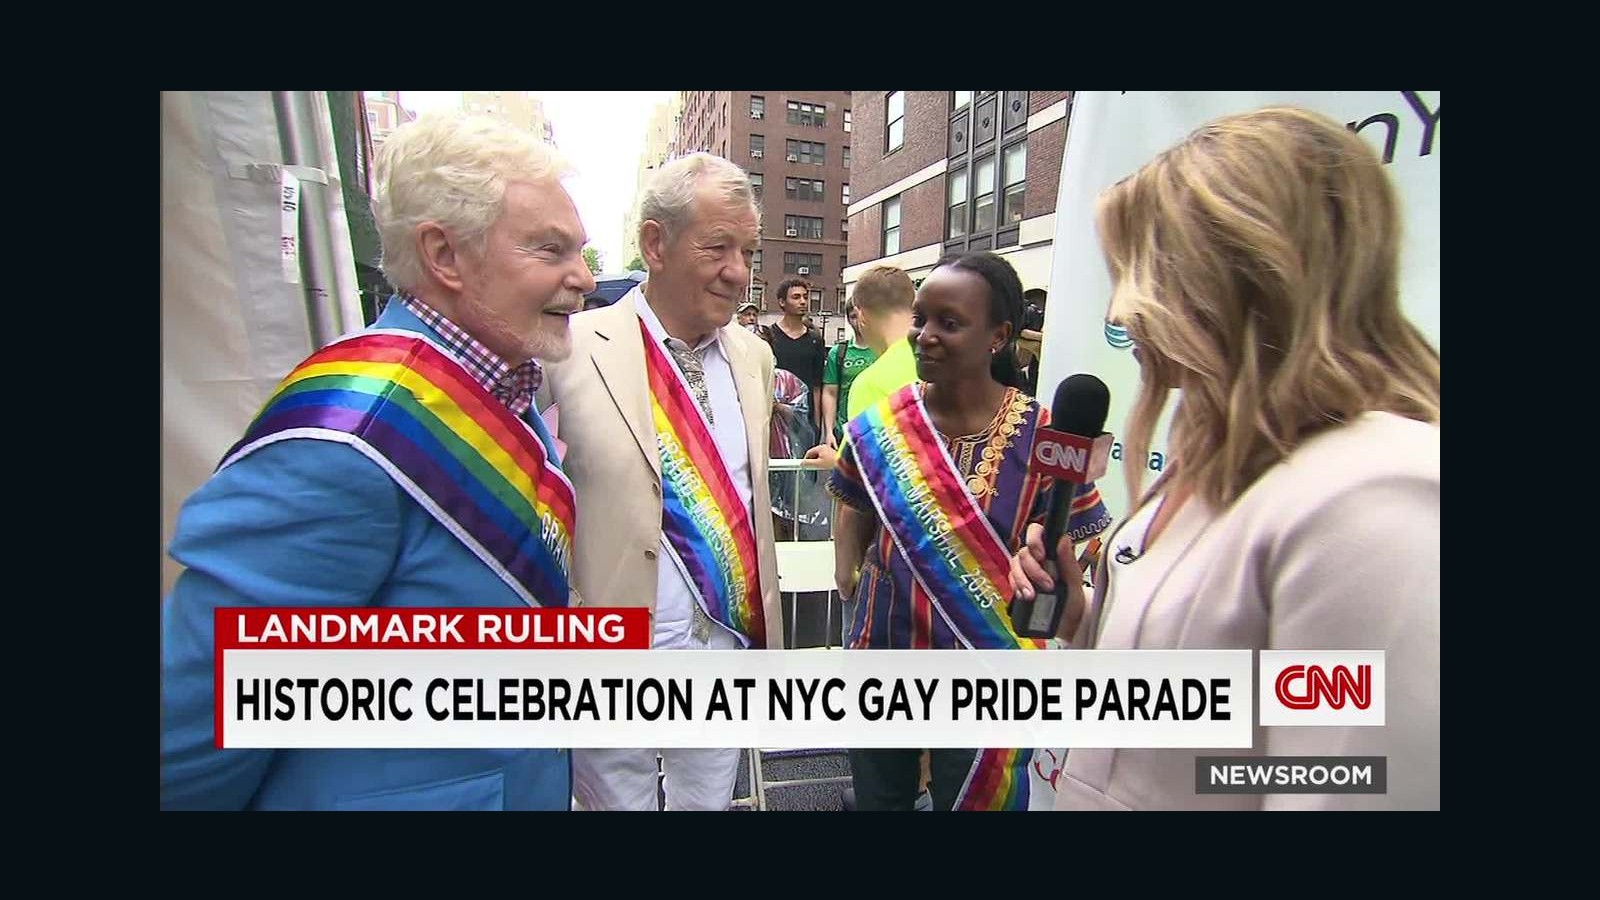 the first gay pride parade aired on television